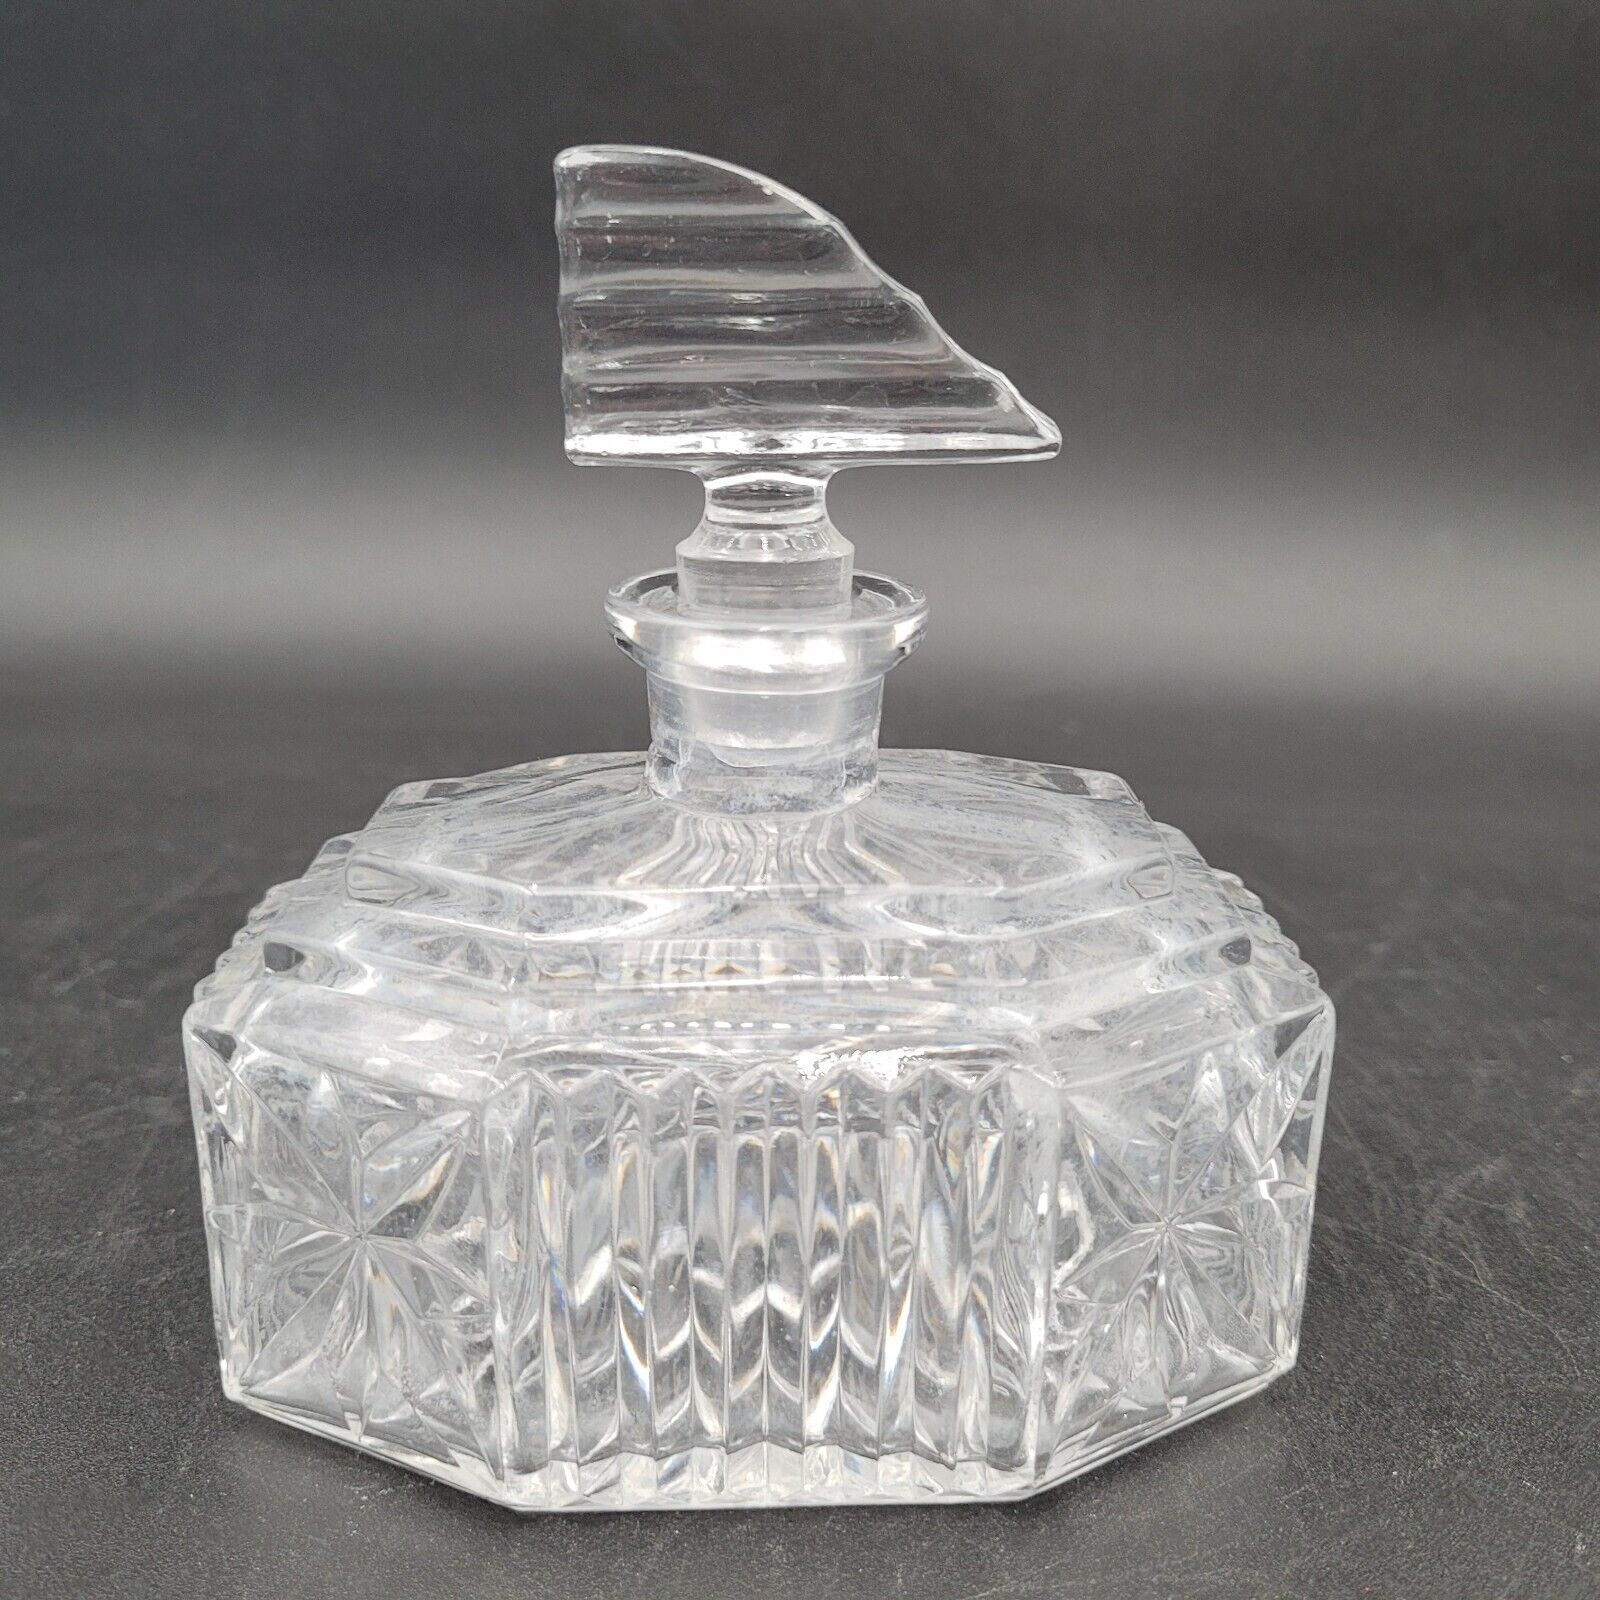 Primary image for Vintage Large Art Deco Clear Glass Scent Perfume Bottle with Stopper 1930s